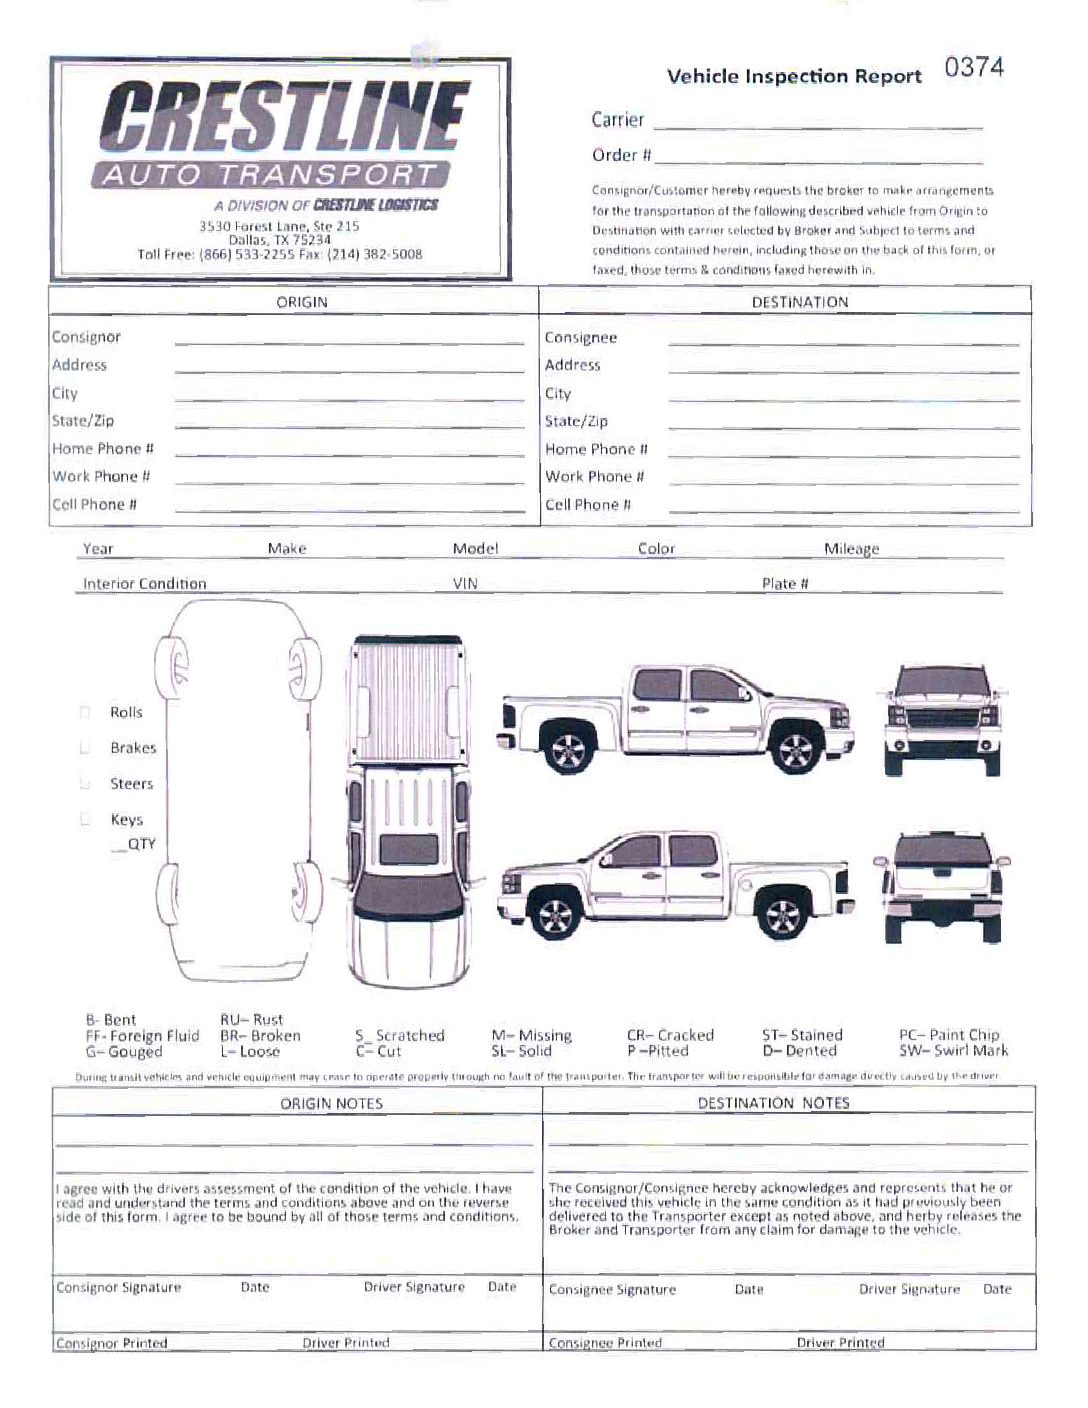 Do you Need Insurance to Ship your Car? With Truck Condition Report Template